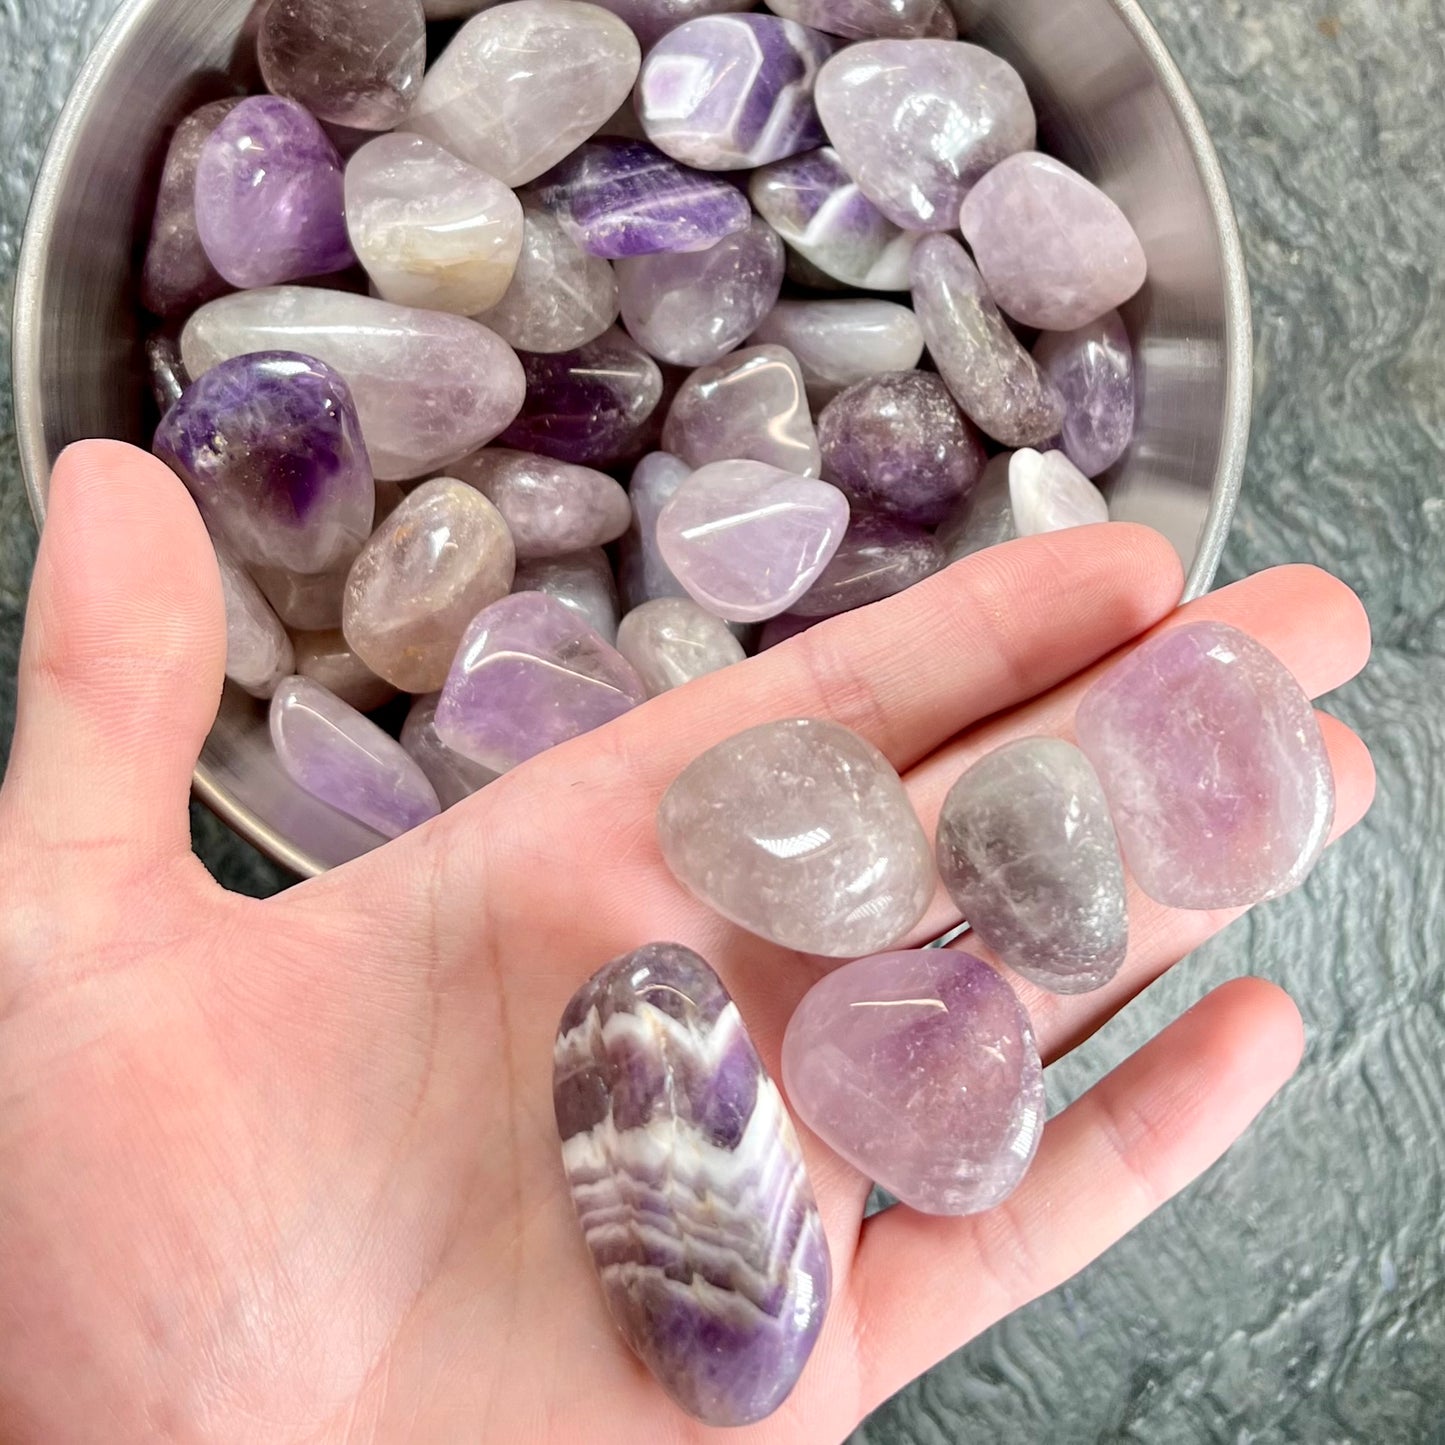 Palm sized, commercial grade, tumbled amethyst stones.